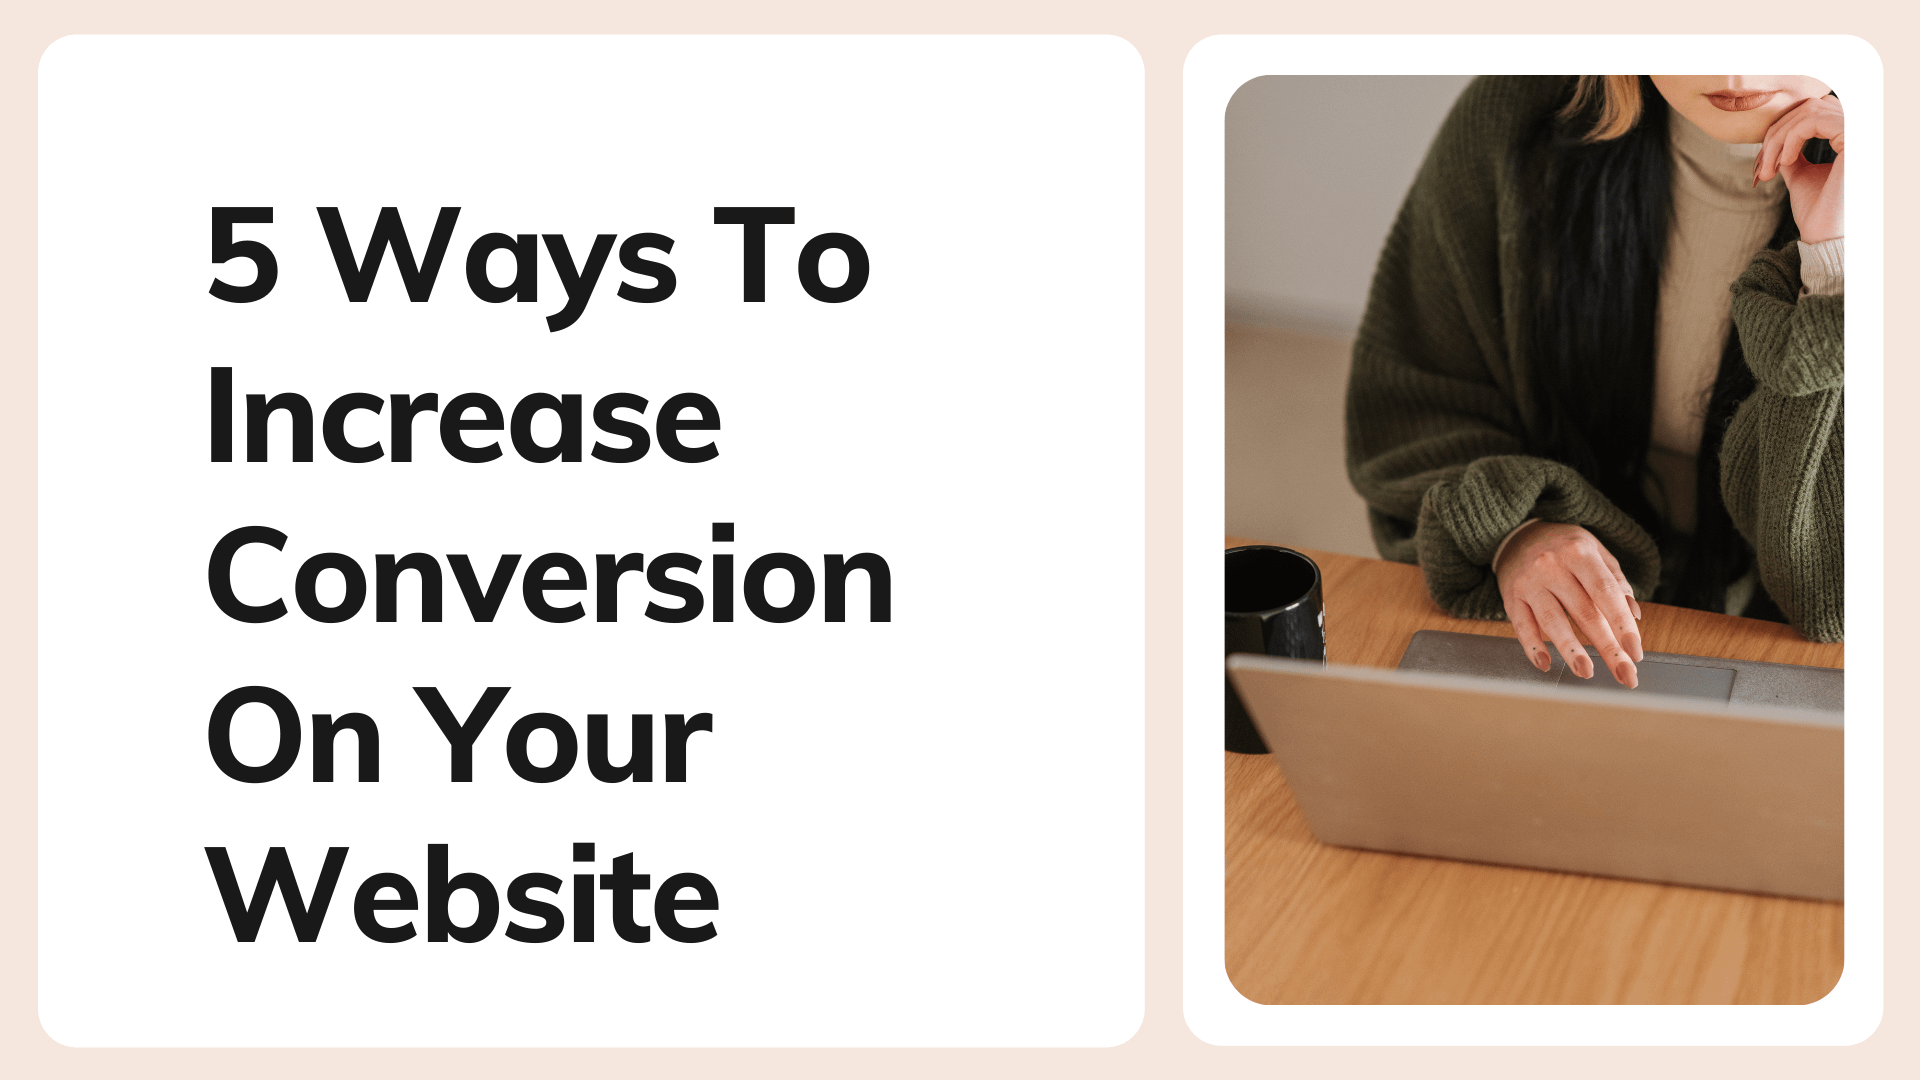 5 Ways To Increase Conversion On Your Website